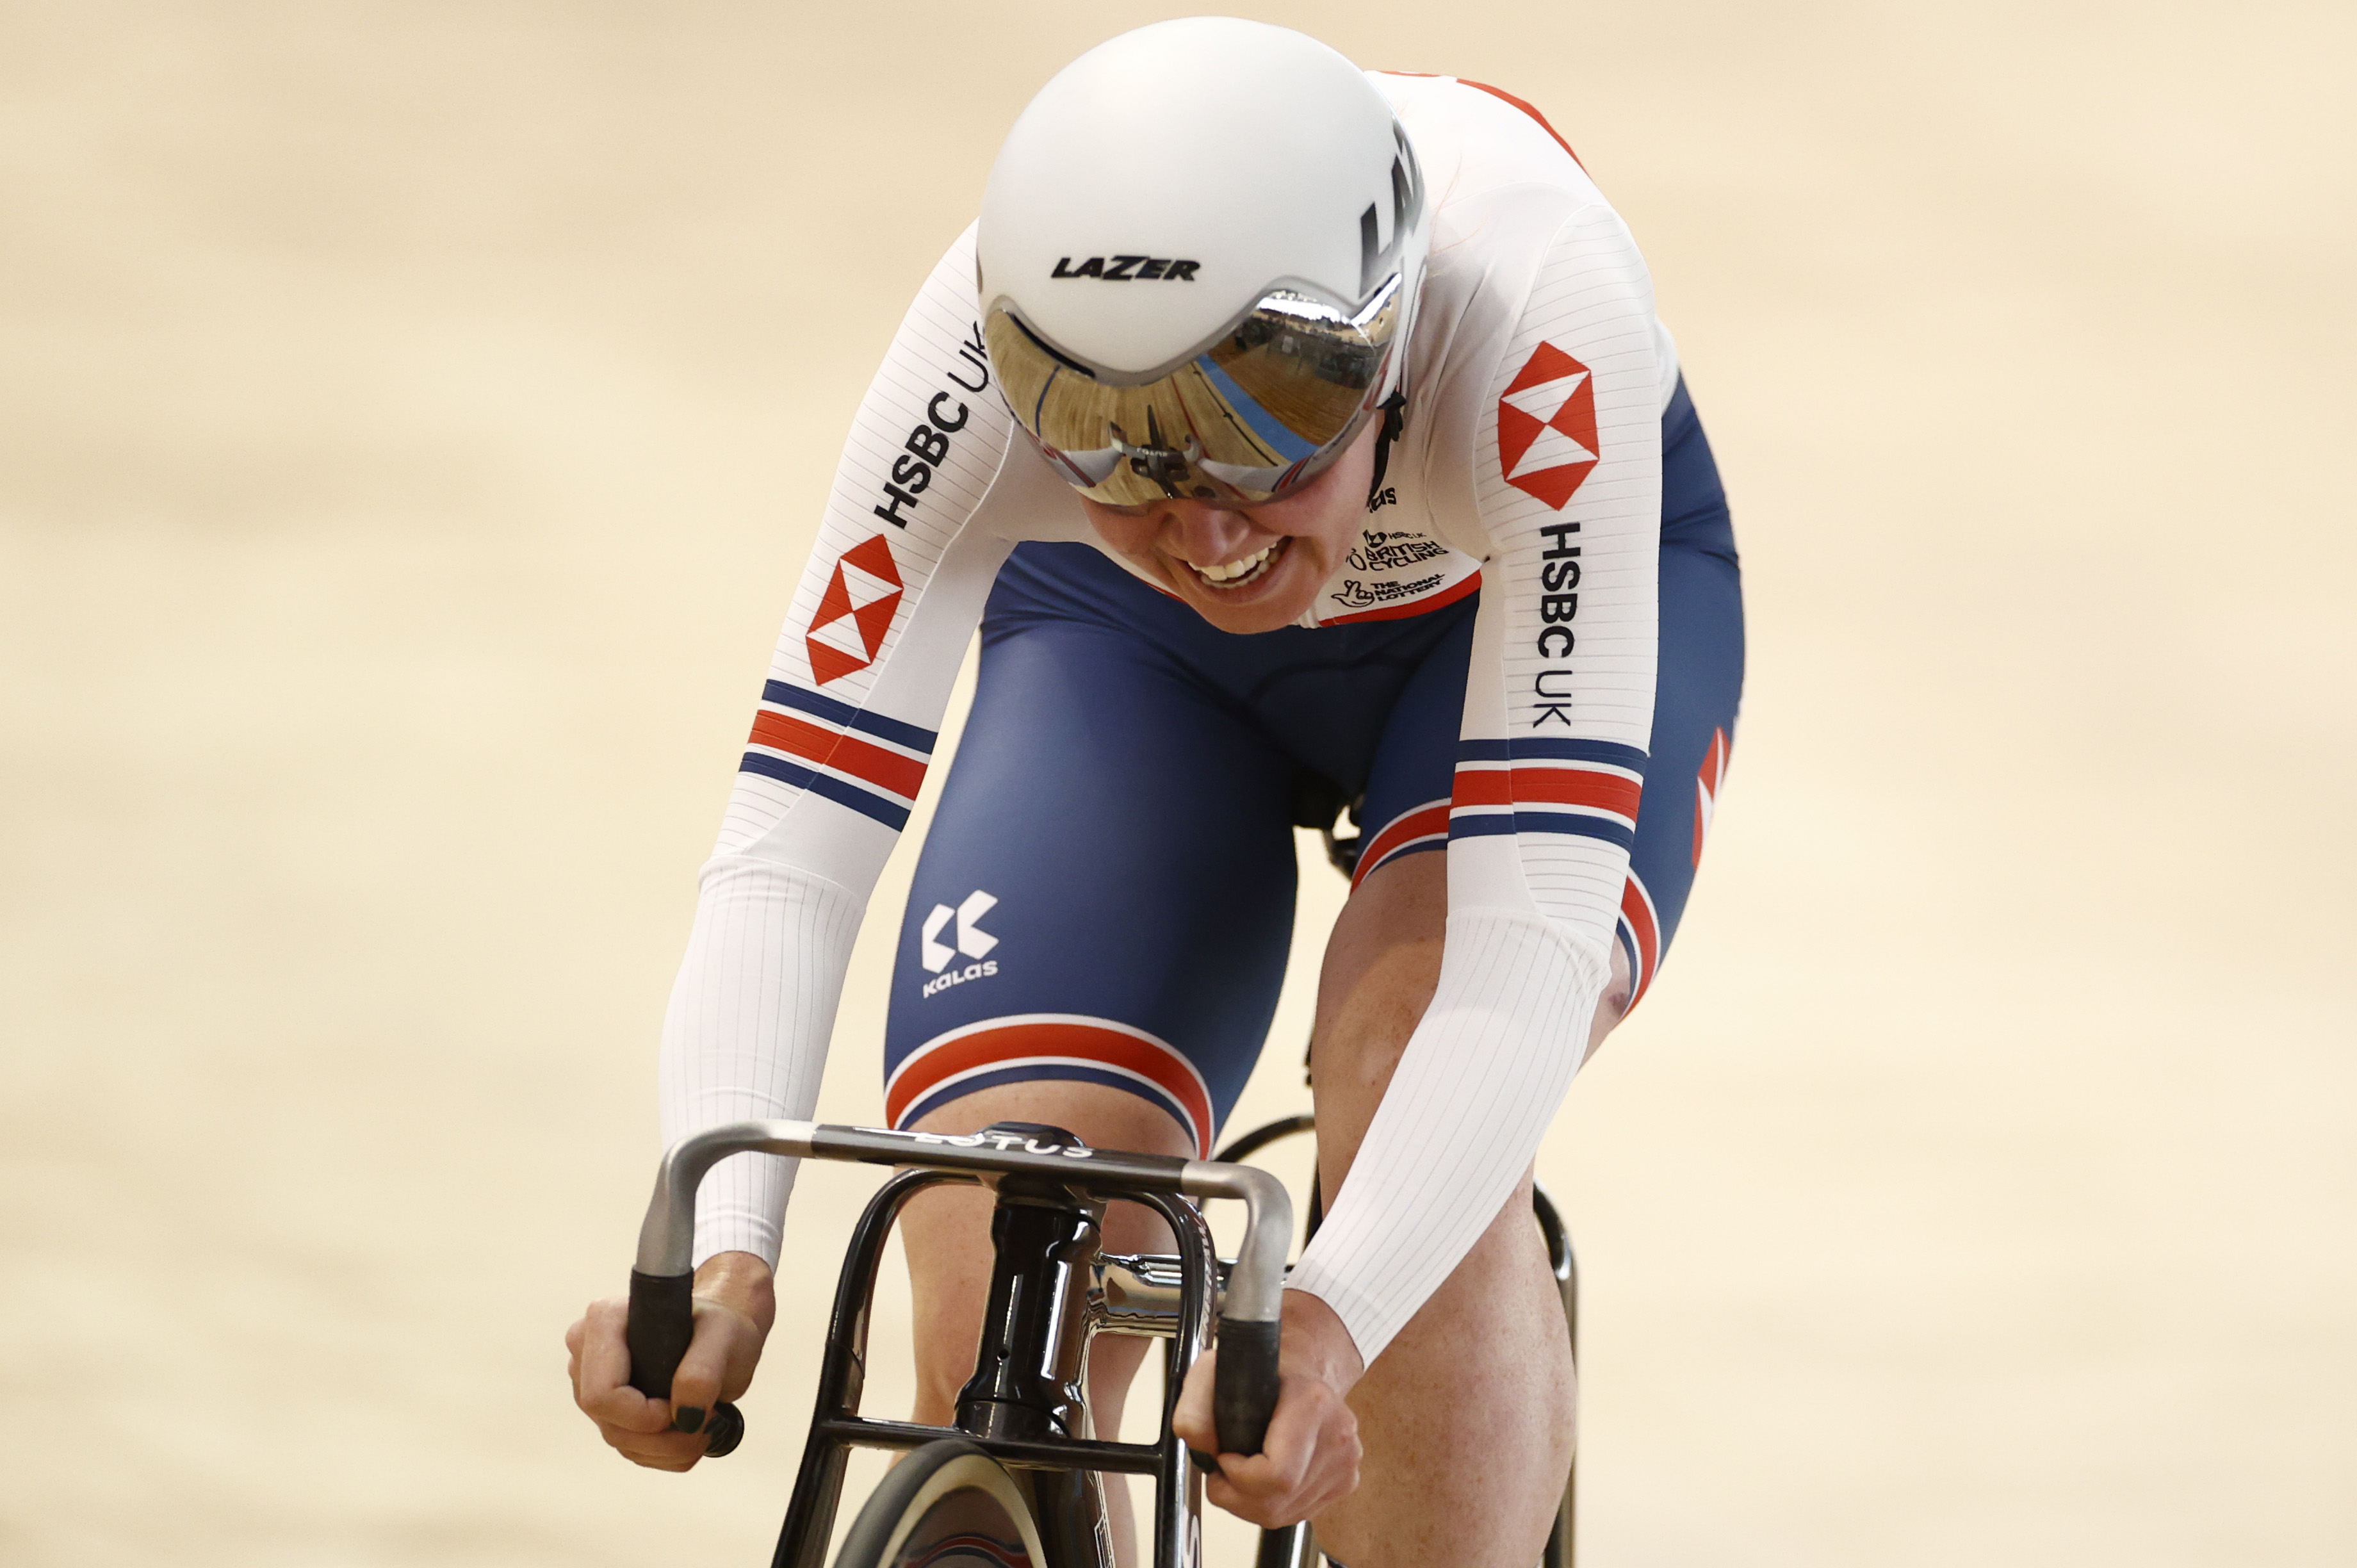 Cycling - UCI Track Cycling World Championships - Stab Velodrome, Roubaix, France - October 24, 2021  Great Britain's Katie Archibald in action during the women's points race REUTERS/Christian Hartmann